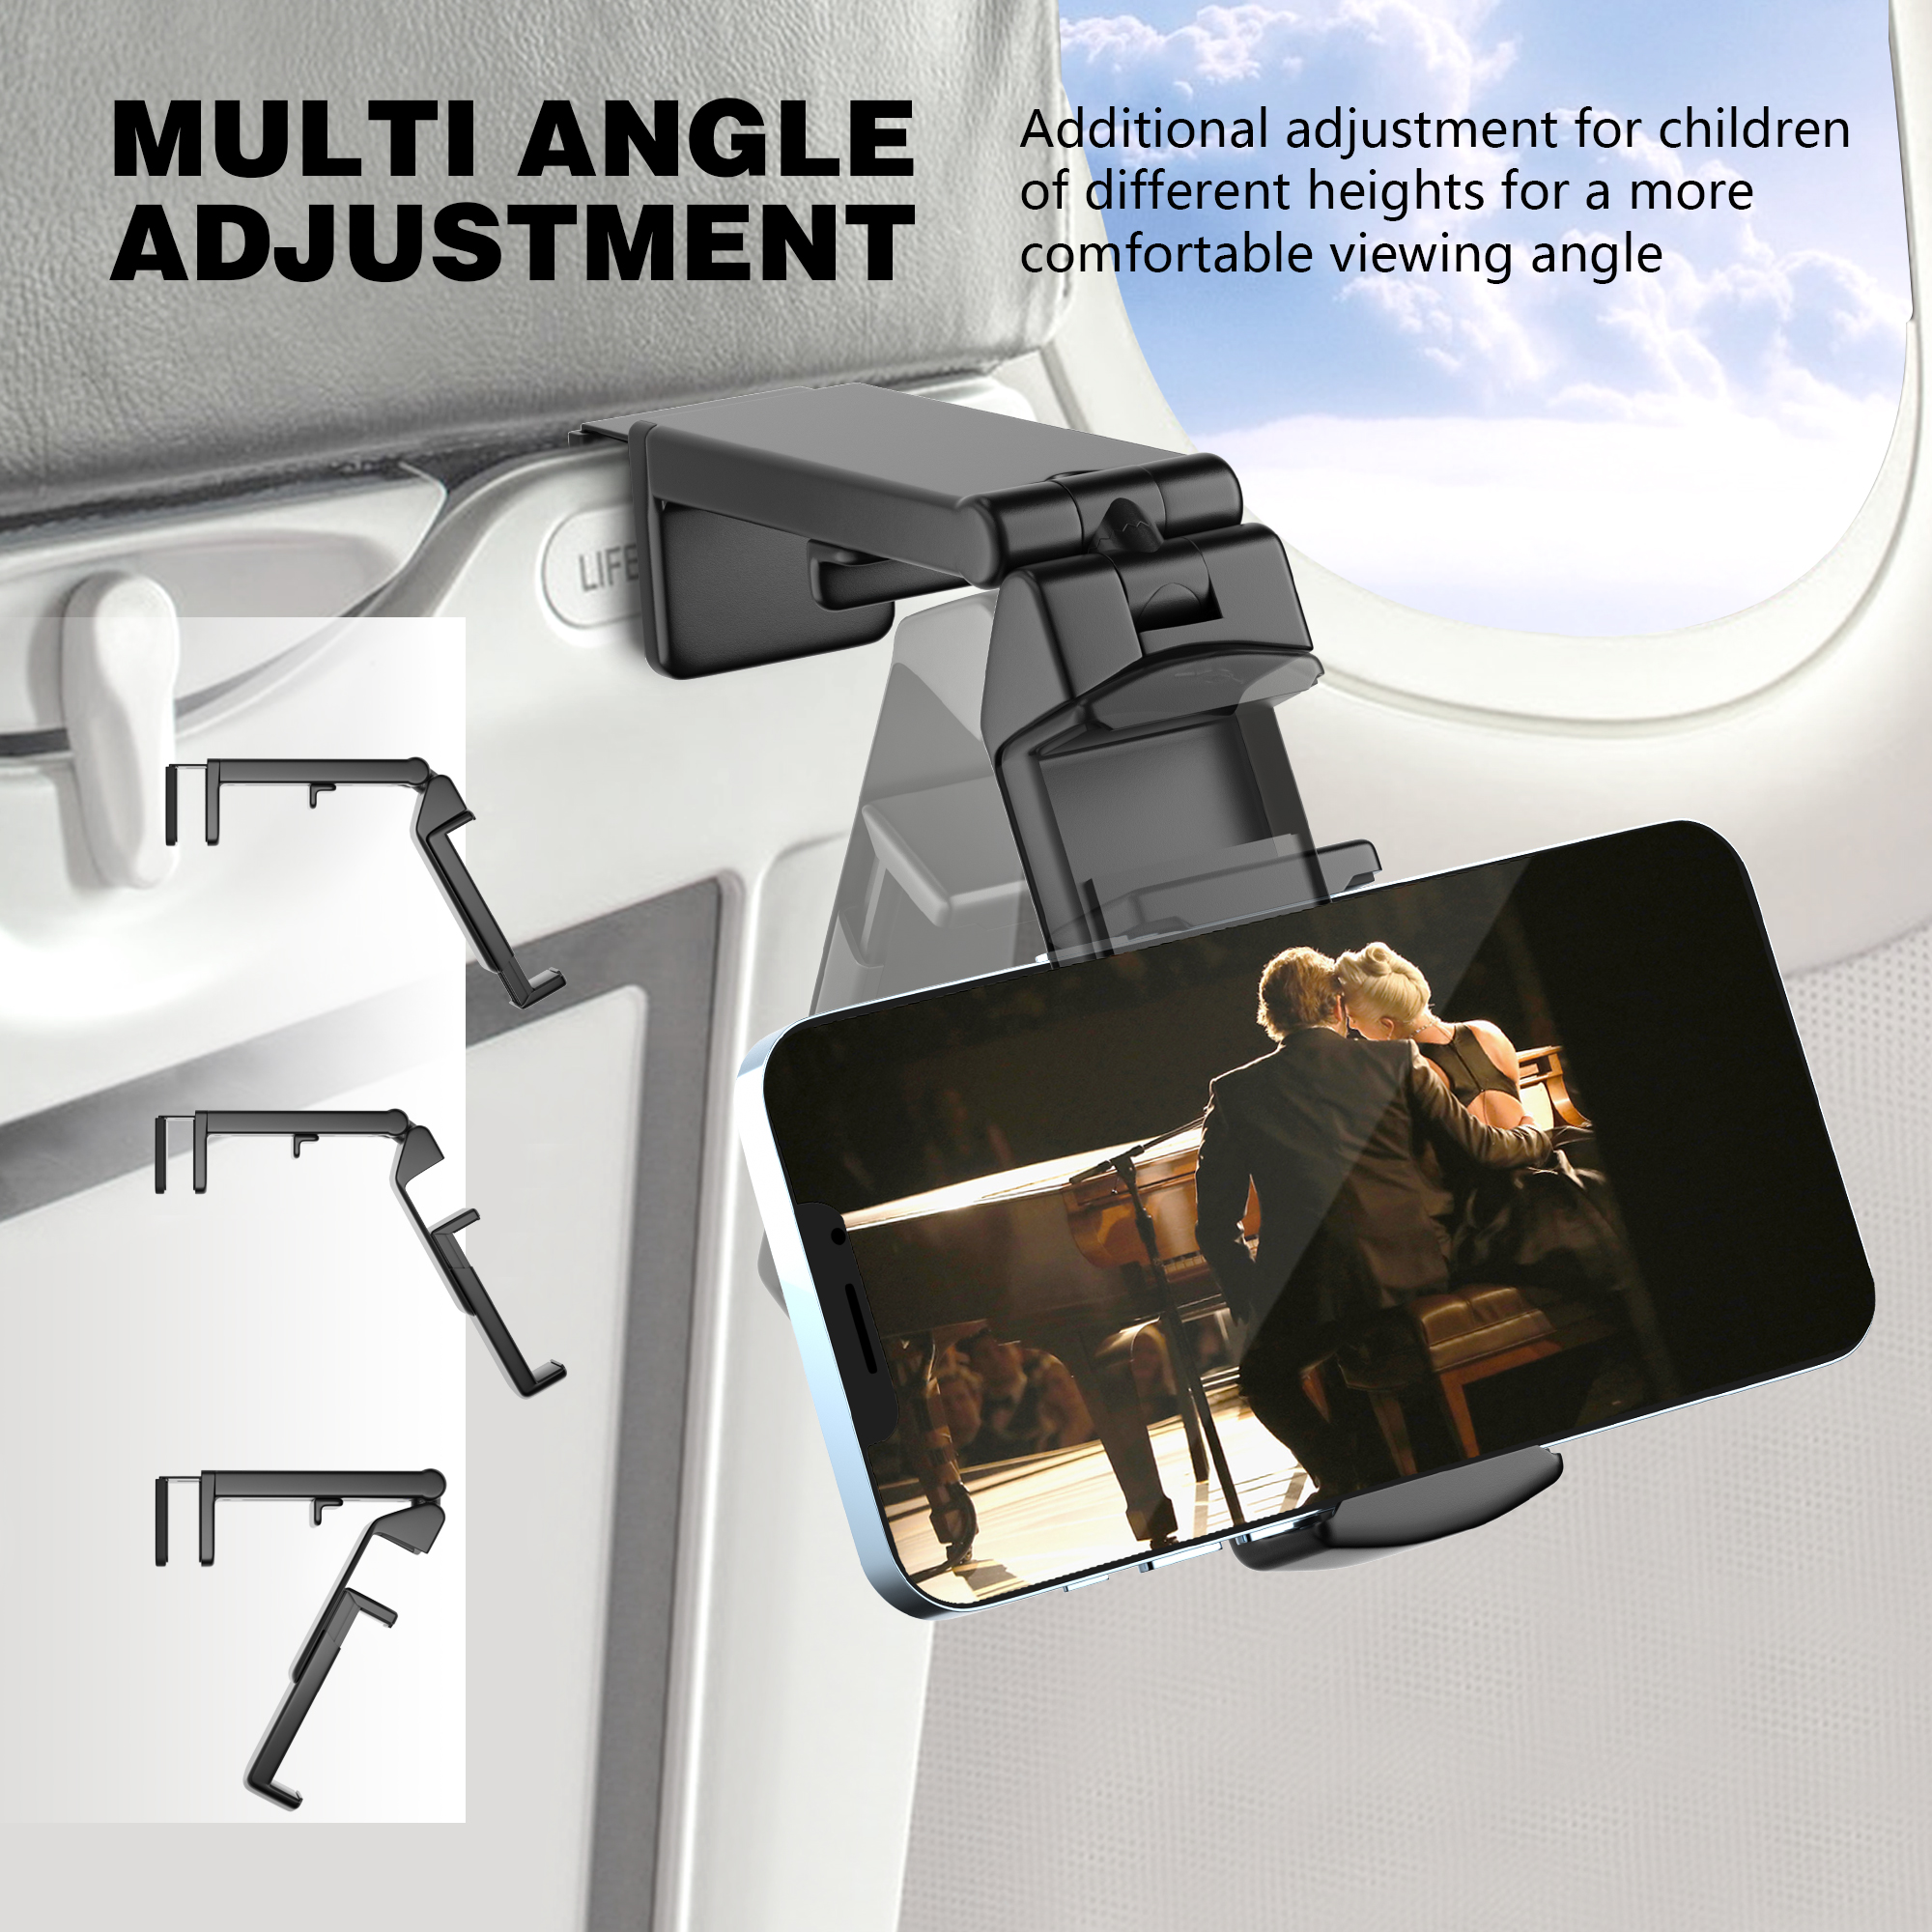 Perilogics Universal Airplane in Flight Phone Mount. Handsfree Phone Holder with Multi-Directional Dual 360 Degree Rotation. Use As Phone Stand, Handheld, Mount On Table Or Cabinet. - image 3 of 8